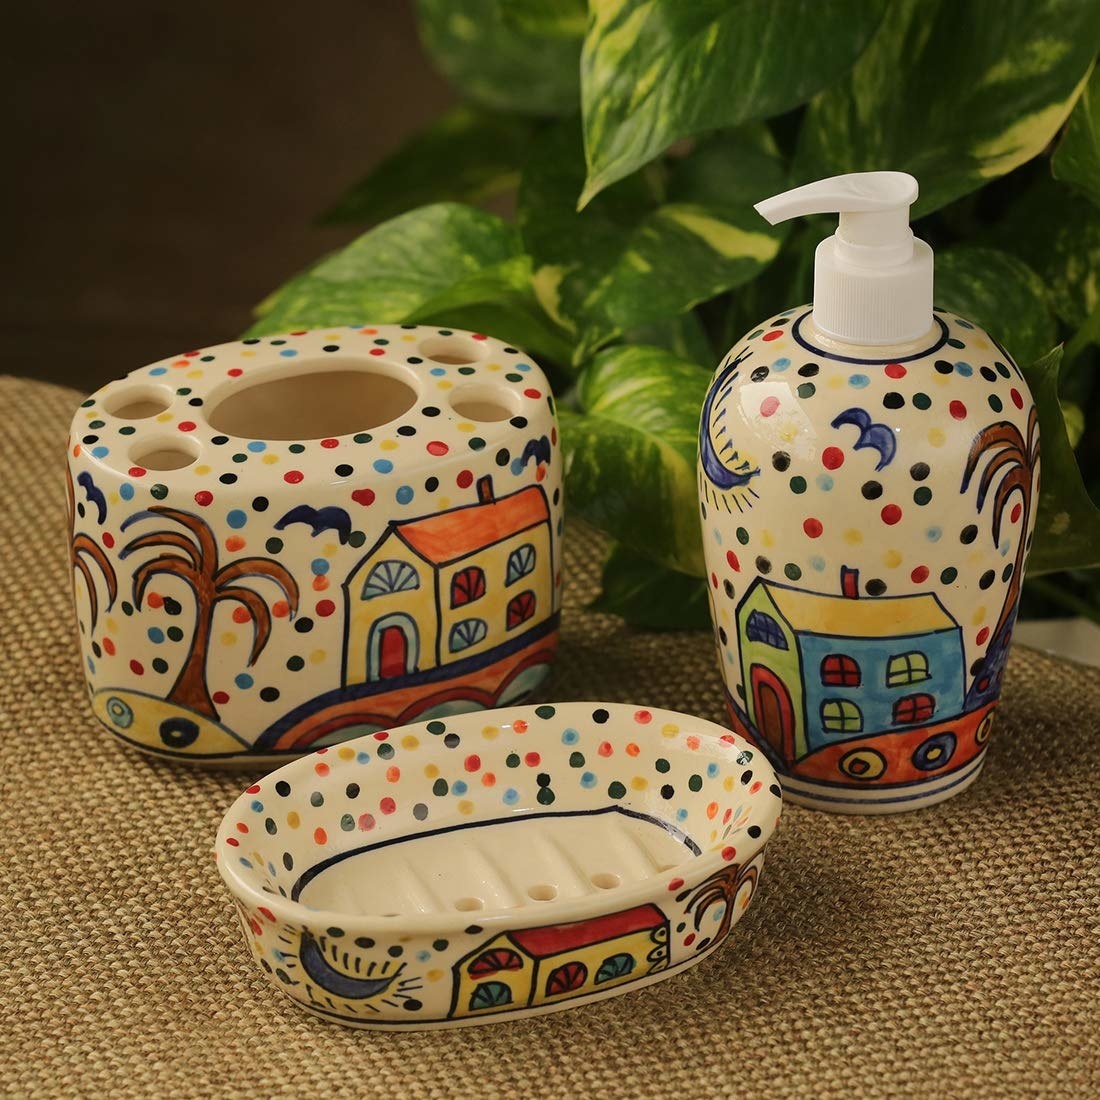 A soap dish, liquid soap dispenser, and a toothbrush holder, with houses and polka dots painted on them